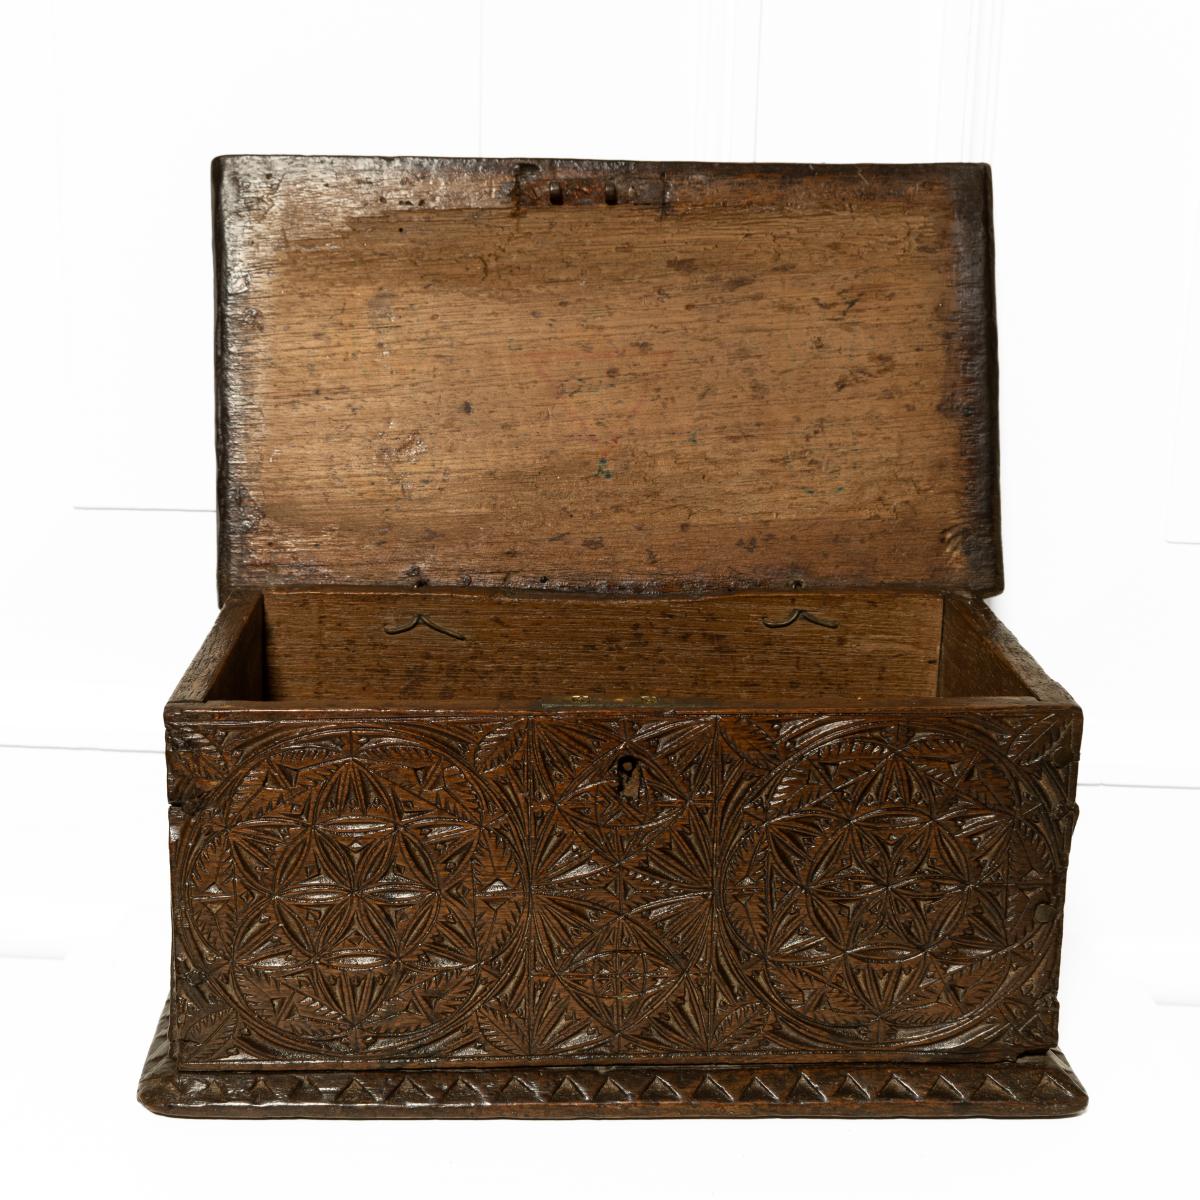 A mid-17th century chip-carved oak box, English/Welsh, circa 1650